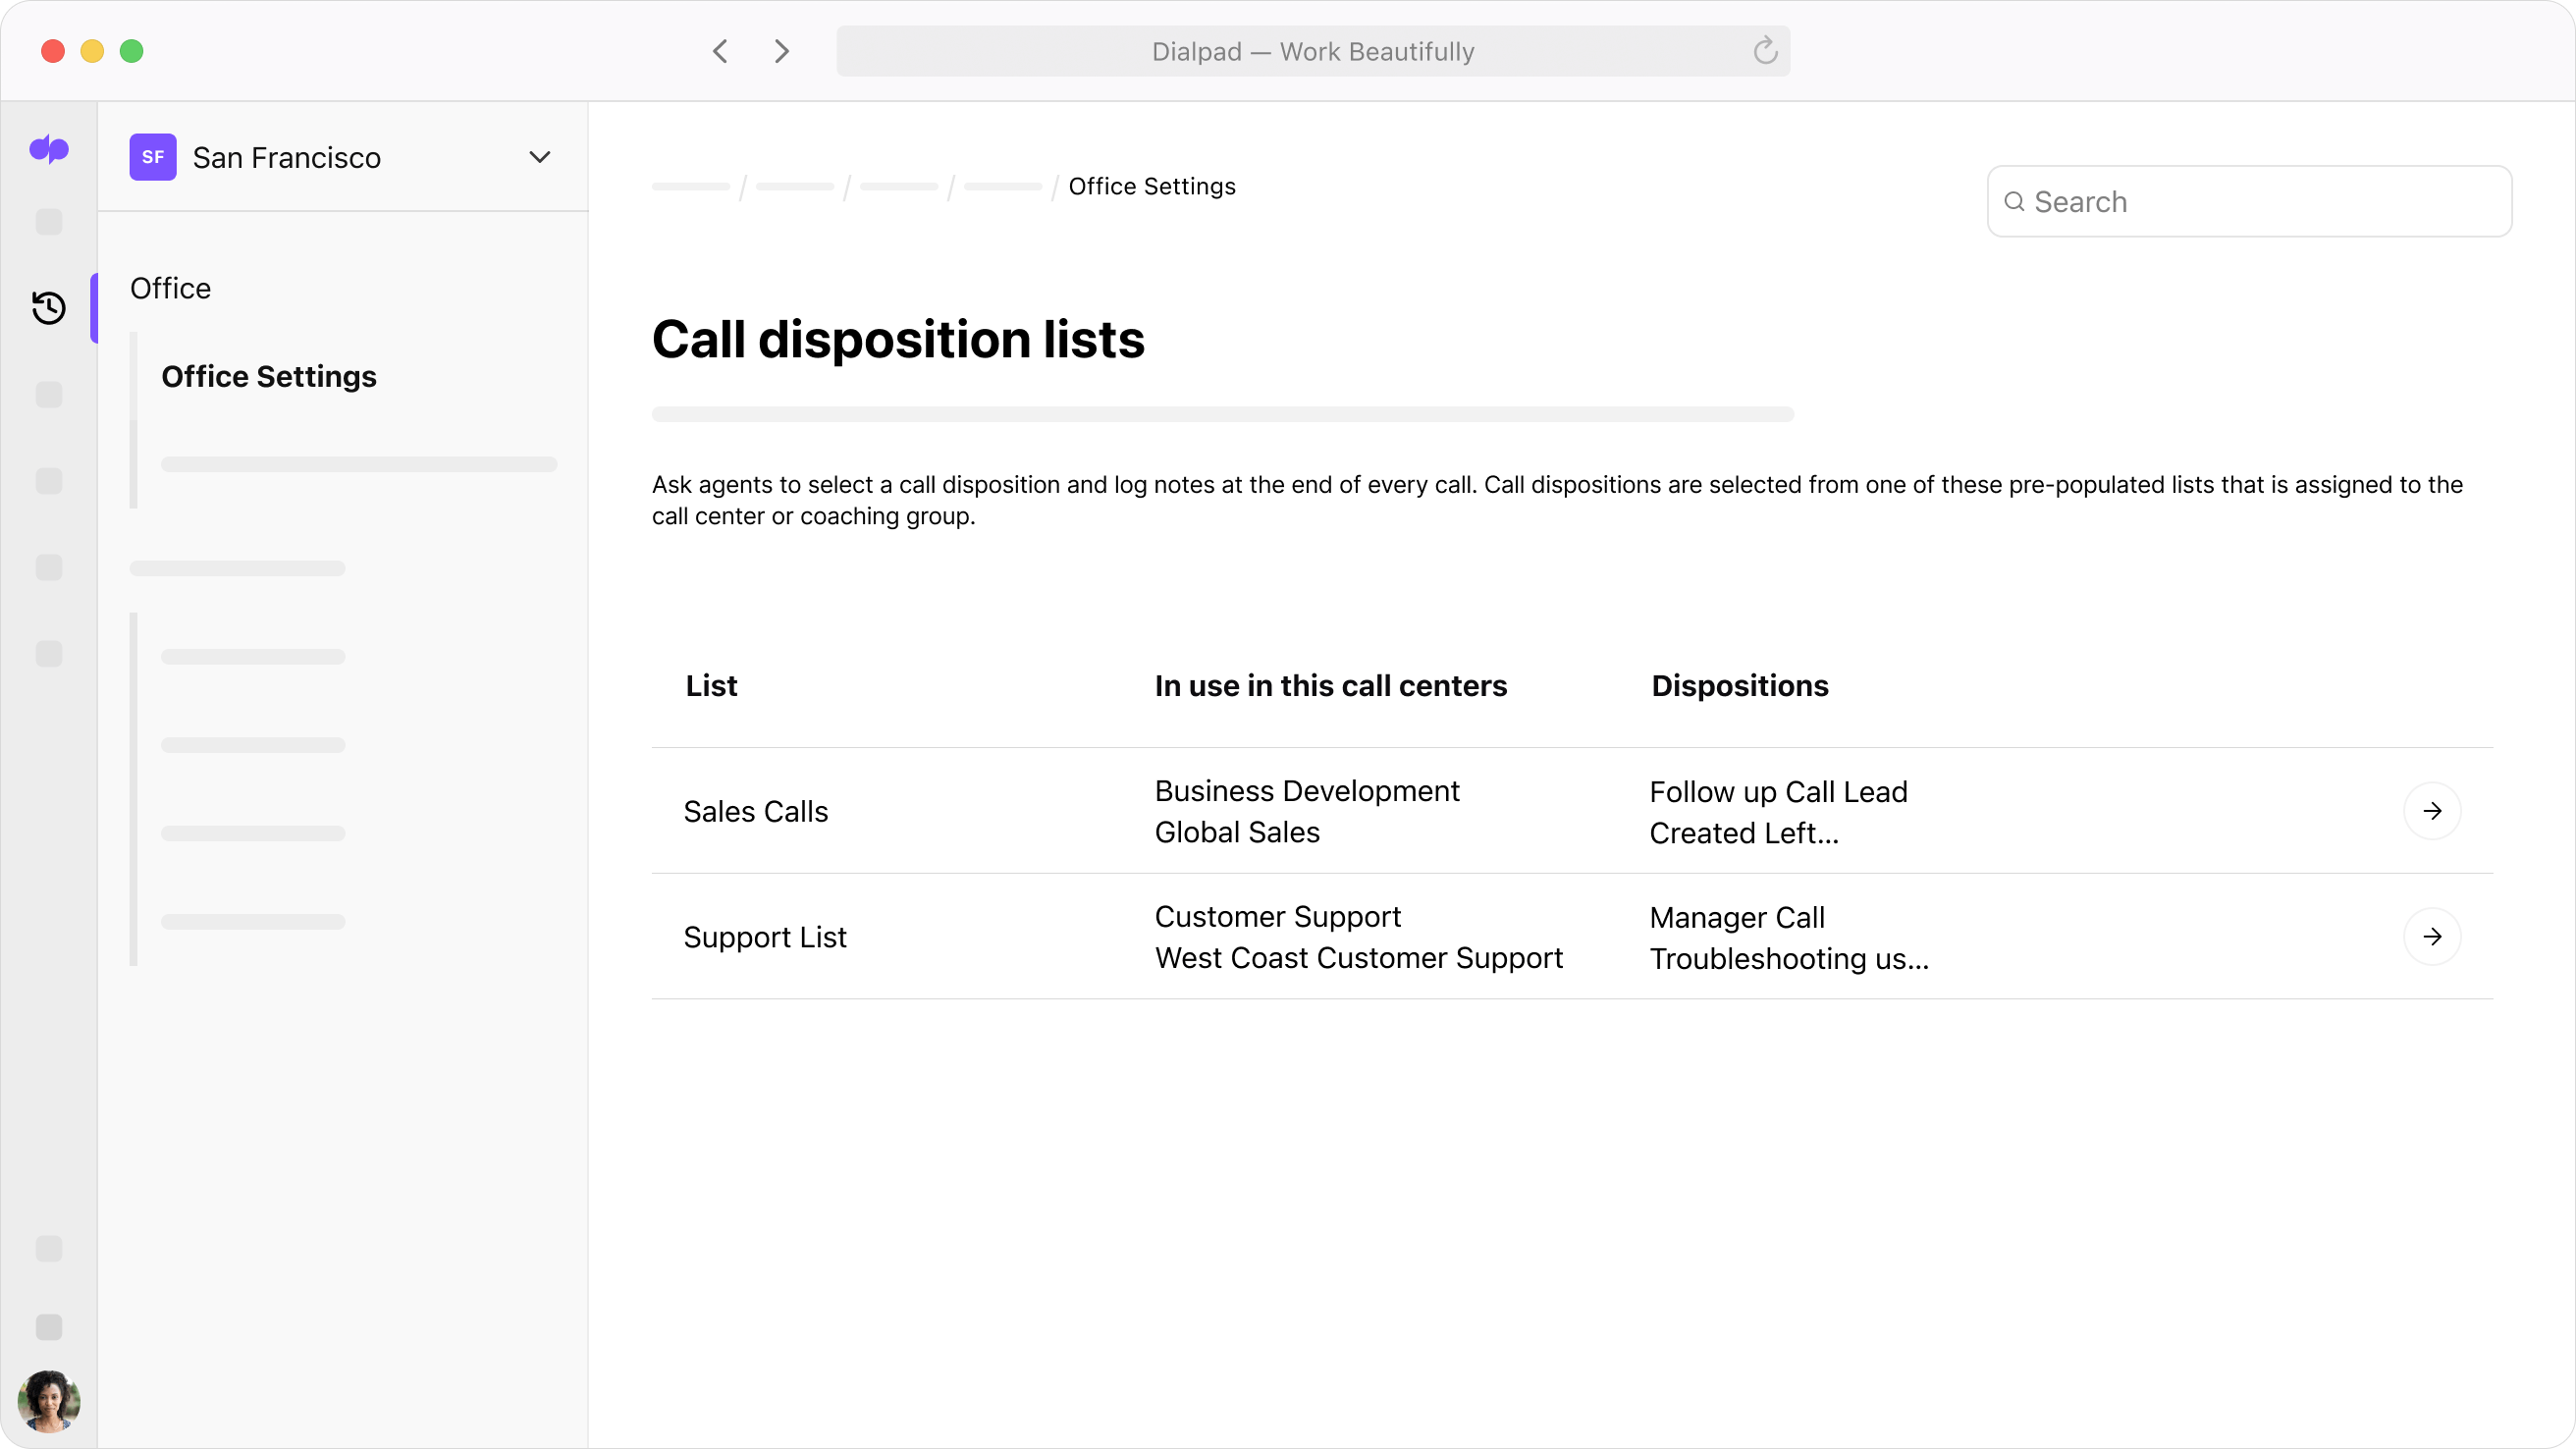 Screenshot of the call disposition lists